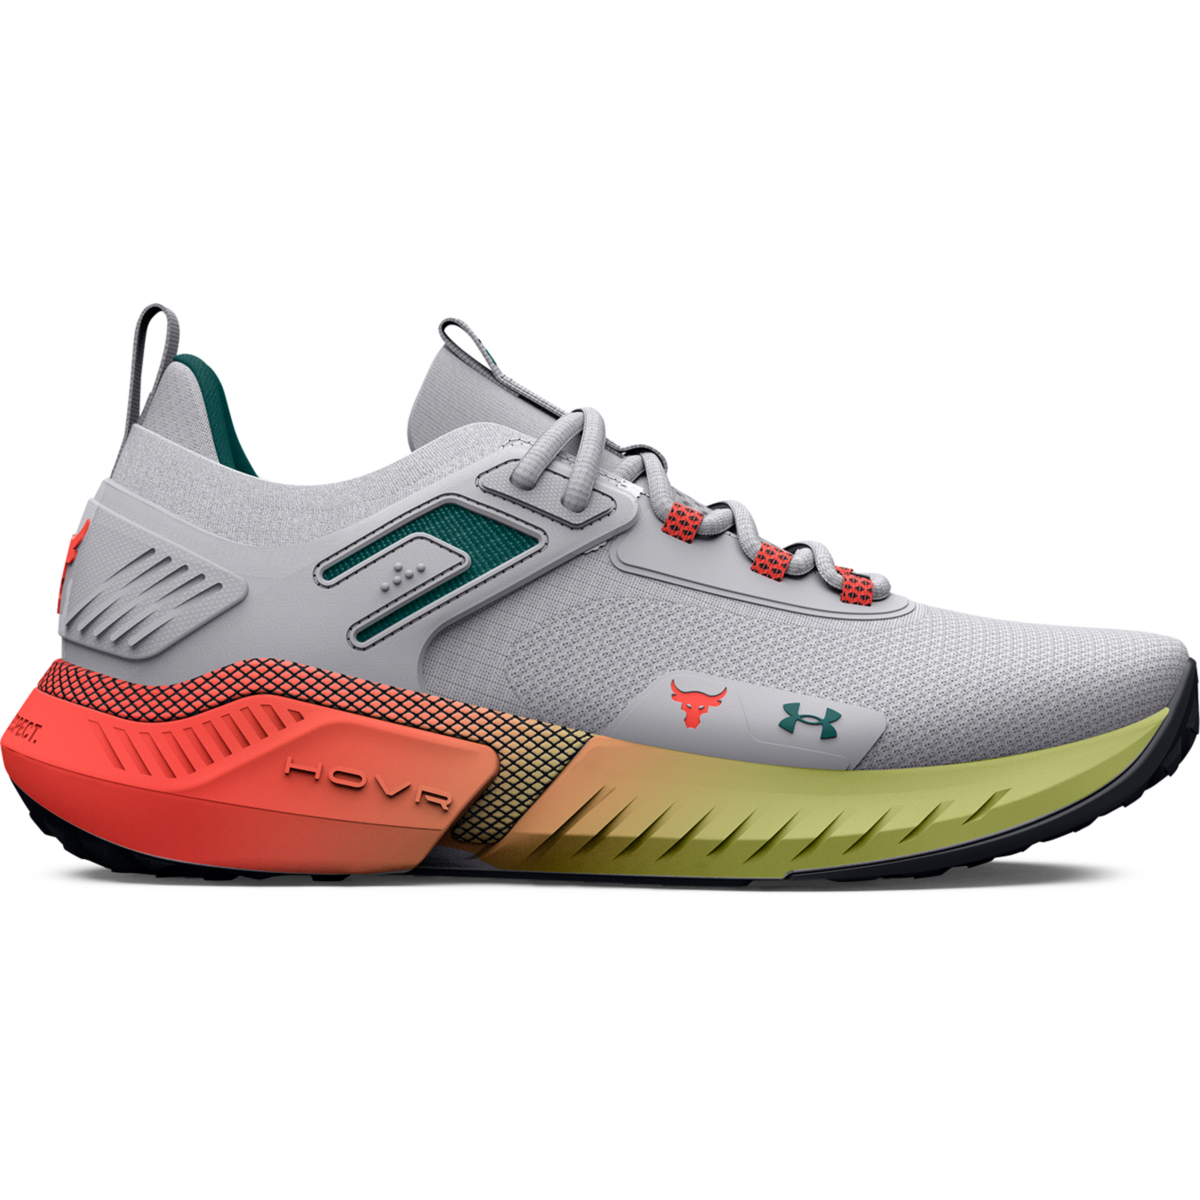 Under Armour - 3025435 UA PROJECT ROCK 5 - 104/91T1 Ανδρικά > Παπούτσια > Αθλητικά > Παπούτσι Low Cut